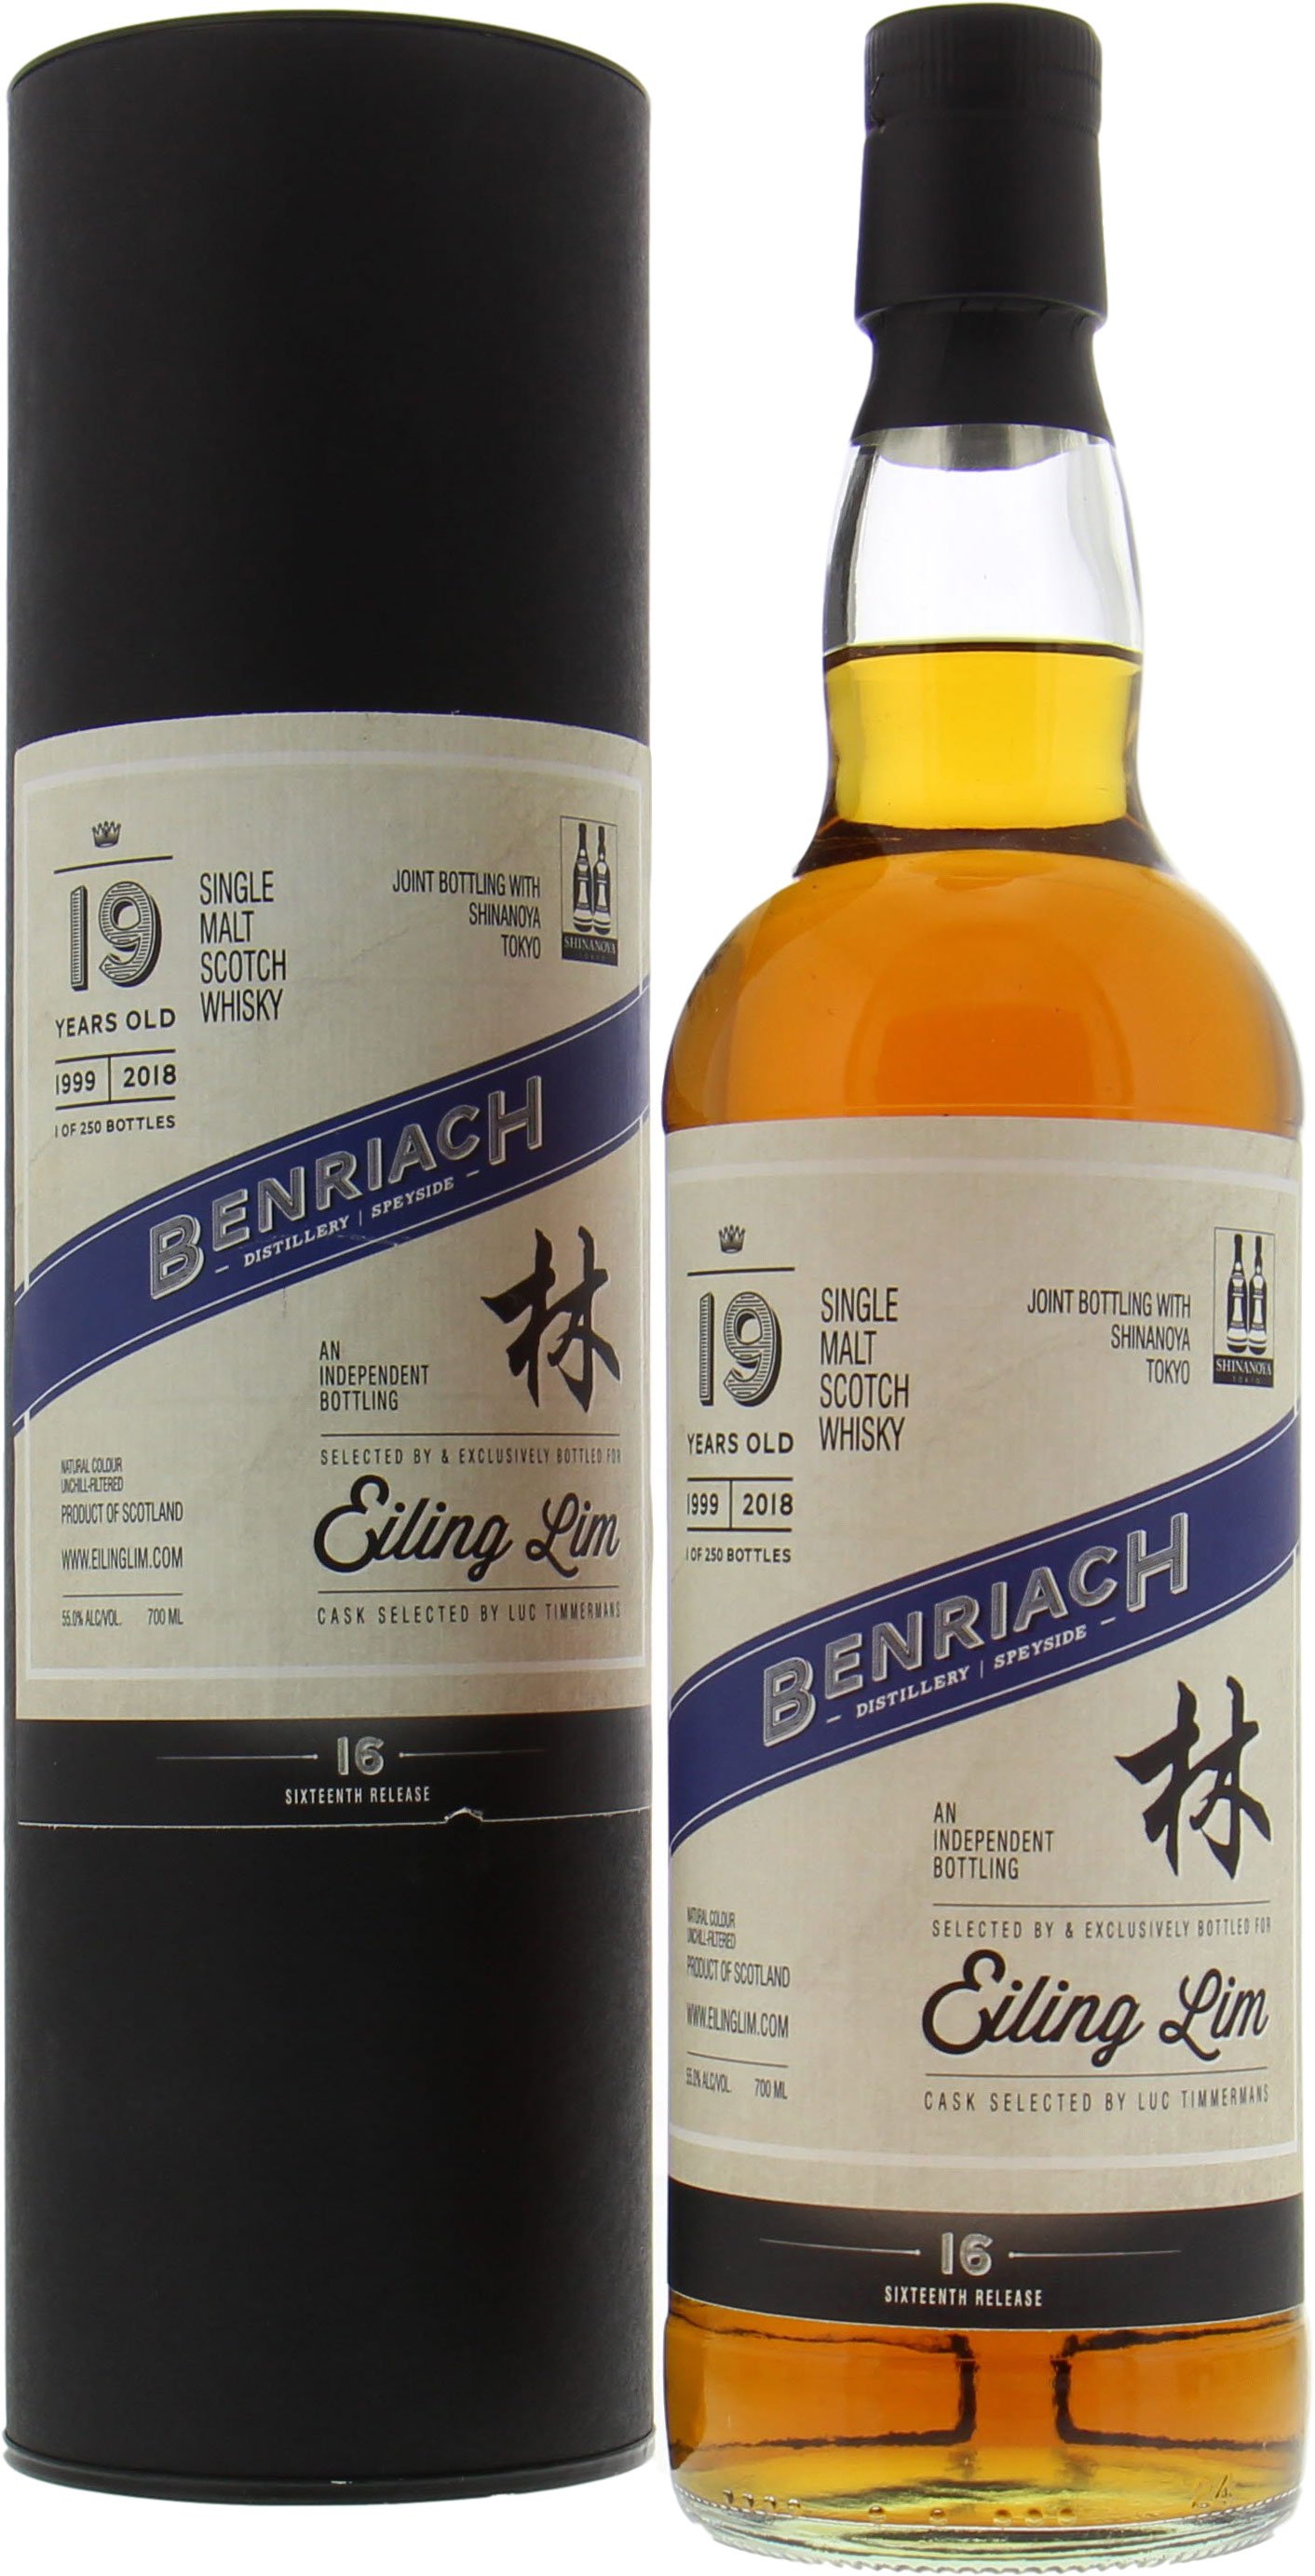 Benriach - 19 Years Old Eiling Lim 16th Release Joint Bottling Shinanoya 55% 1999 In Original Container